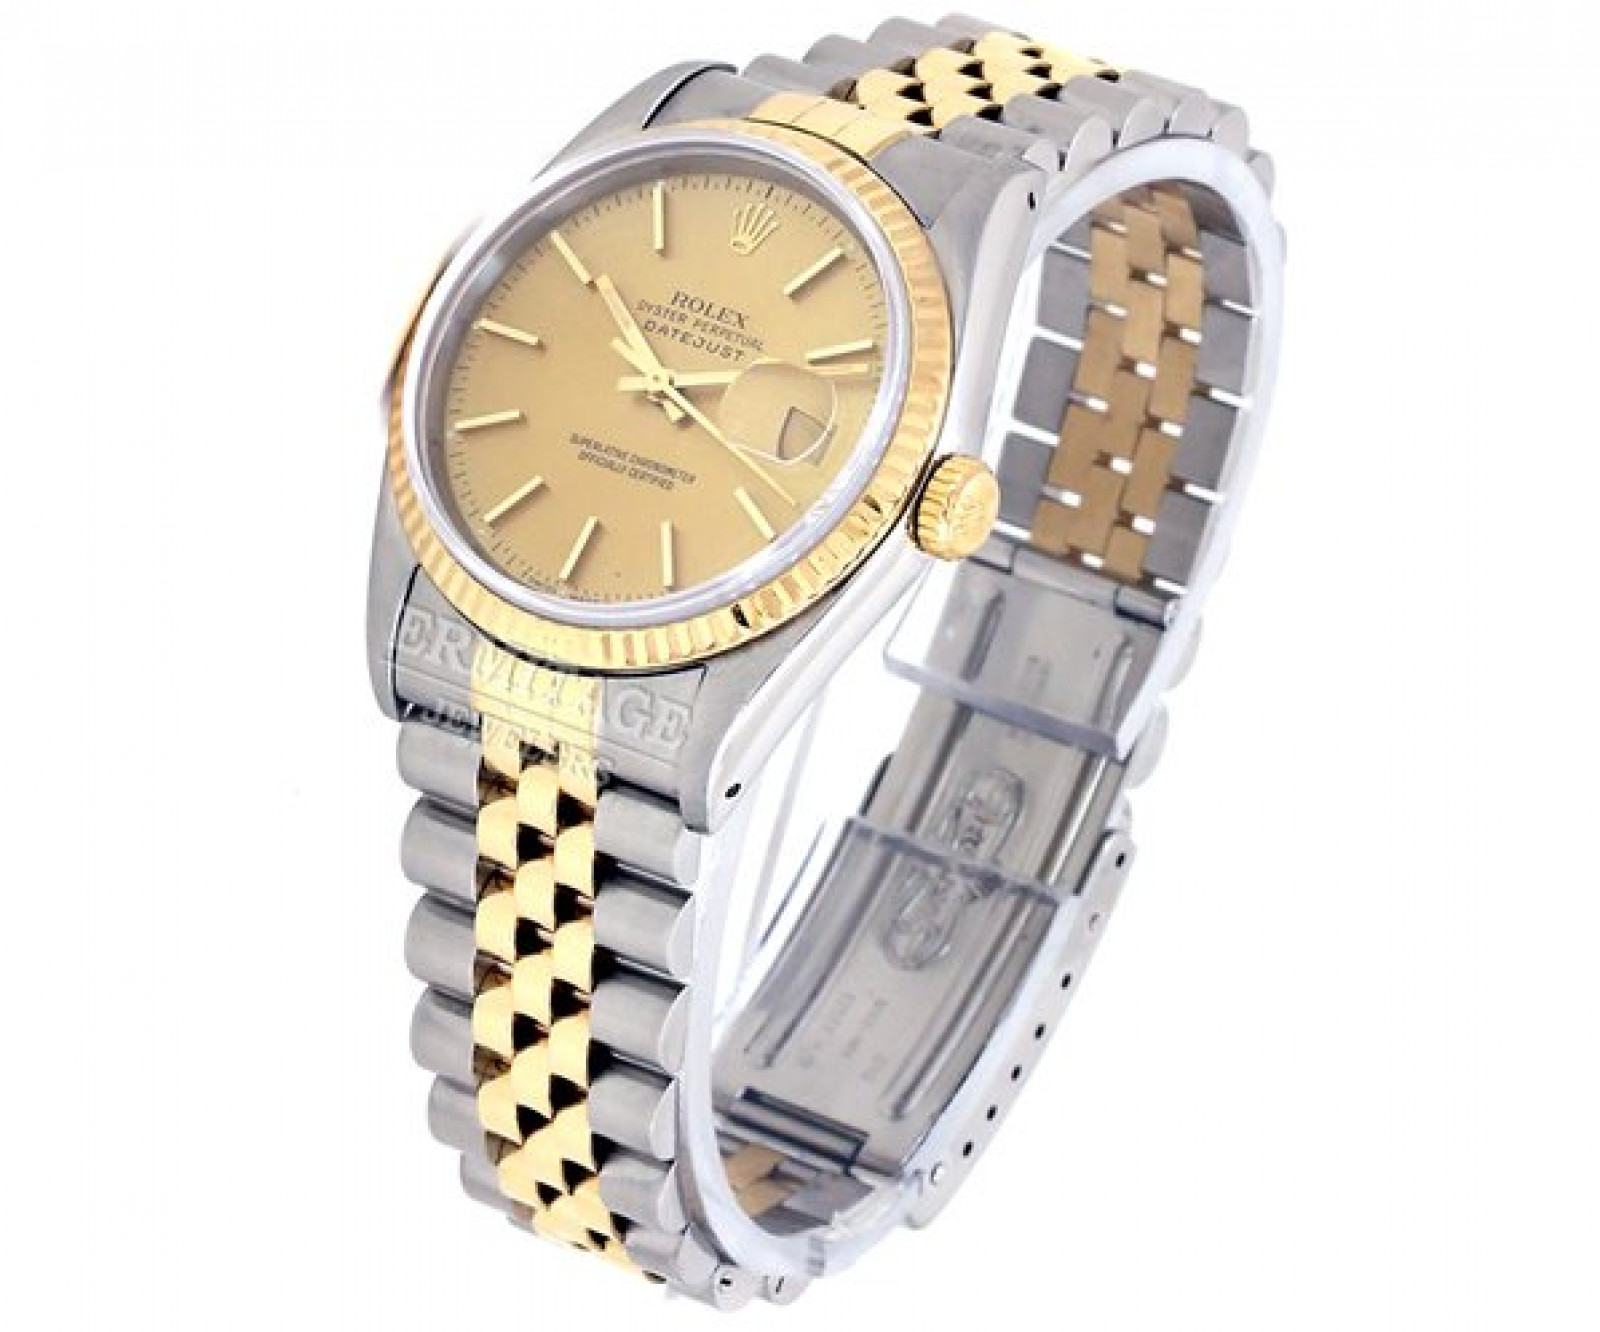 Find Out Your Price for Used Rolex Datejust 16233